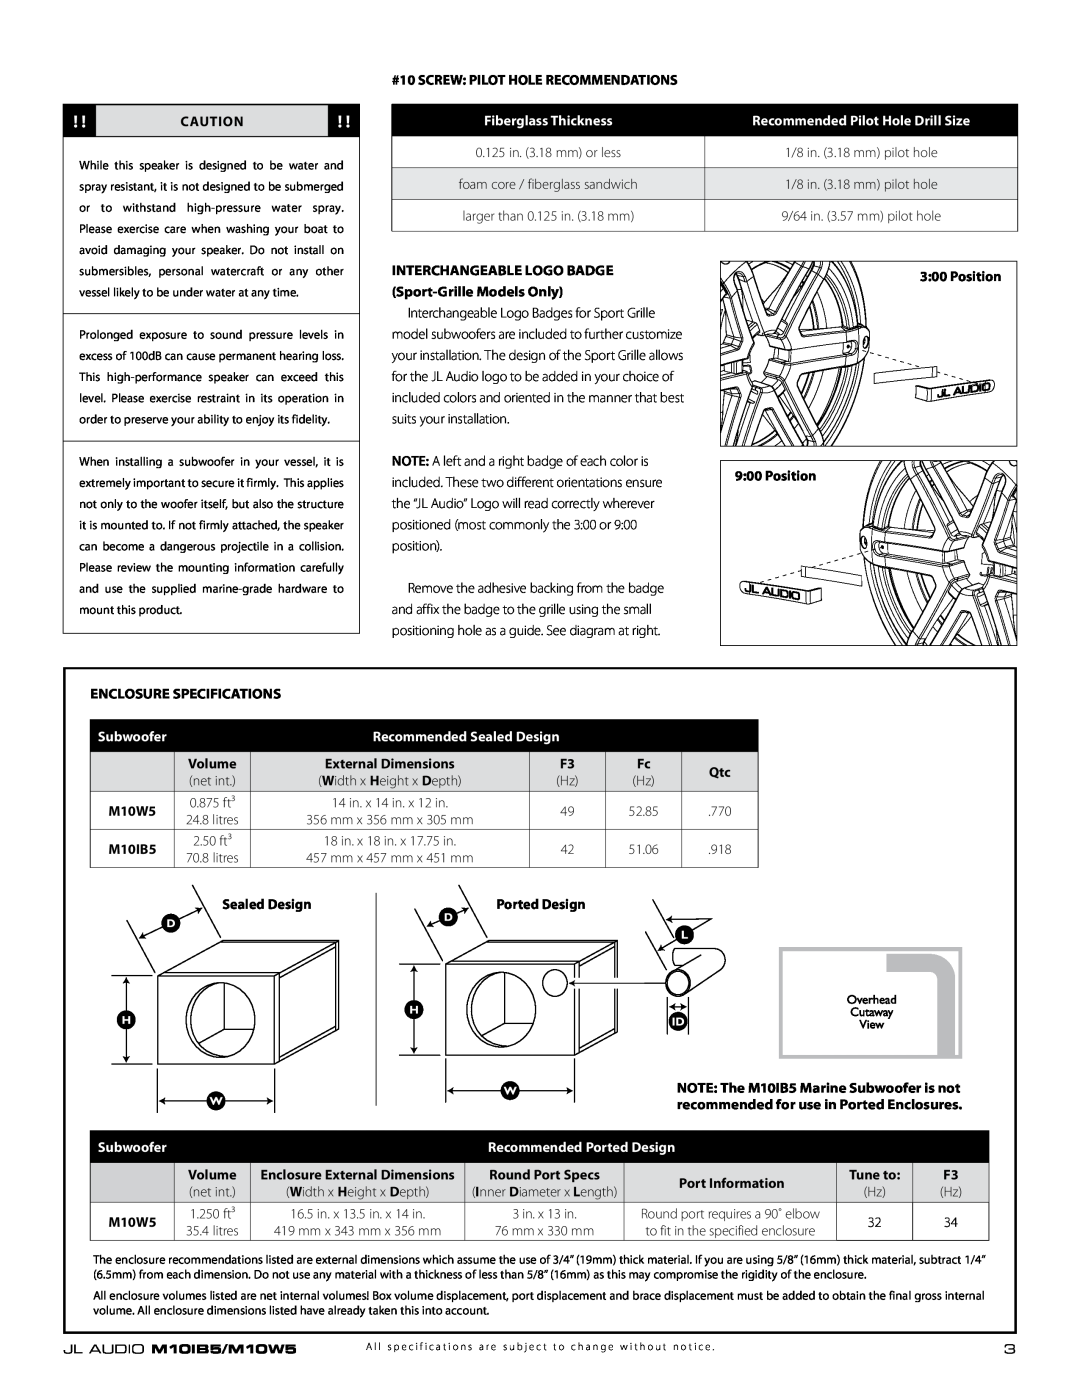 JL Audio M10W5 #10 SCREW PILOT HOLE RECOMMENDATIONS, Fiberglass Thickness, Recommended Pilot Hole Drill Size, Subwoofer 